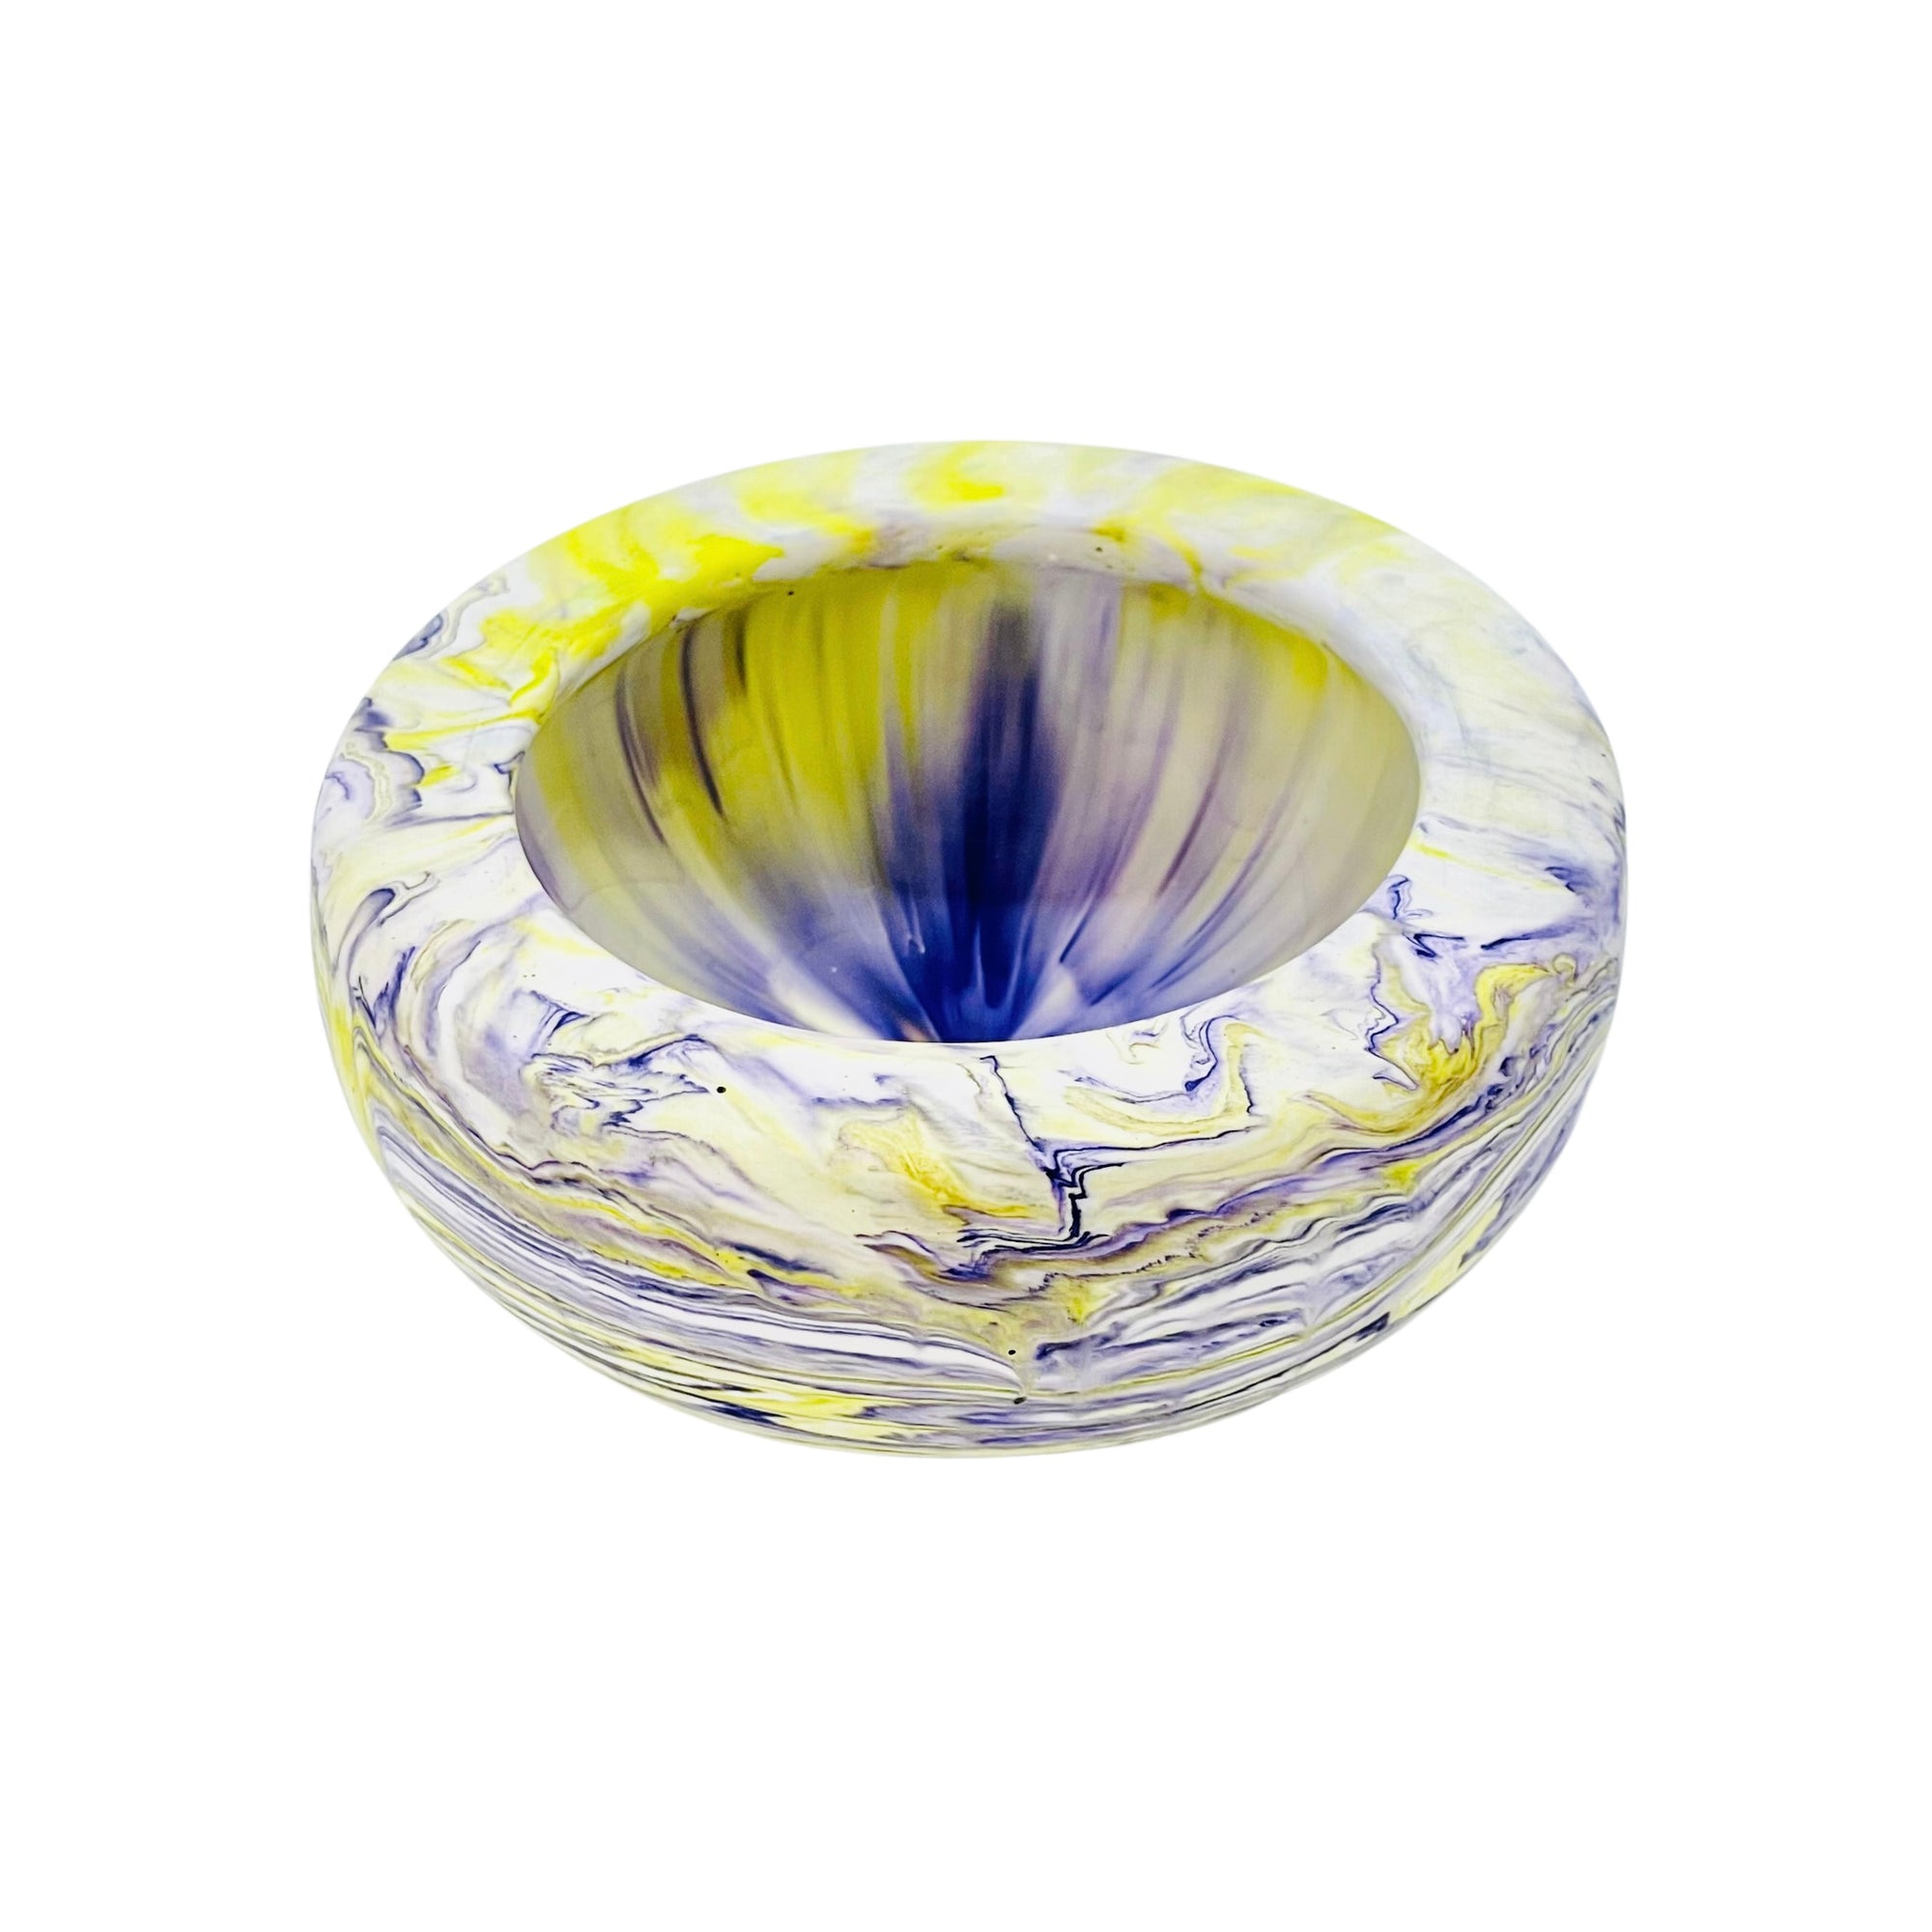 This small round jesmonite bowl measuring 10cm in diameter is marbled with purple and yellow pigment.